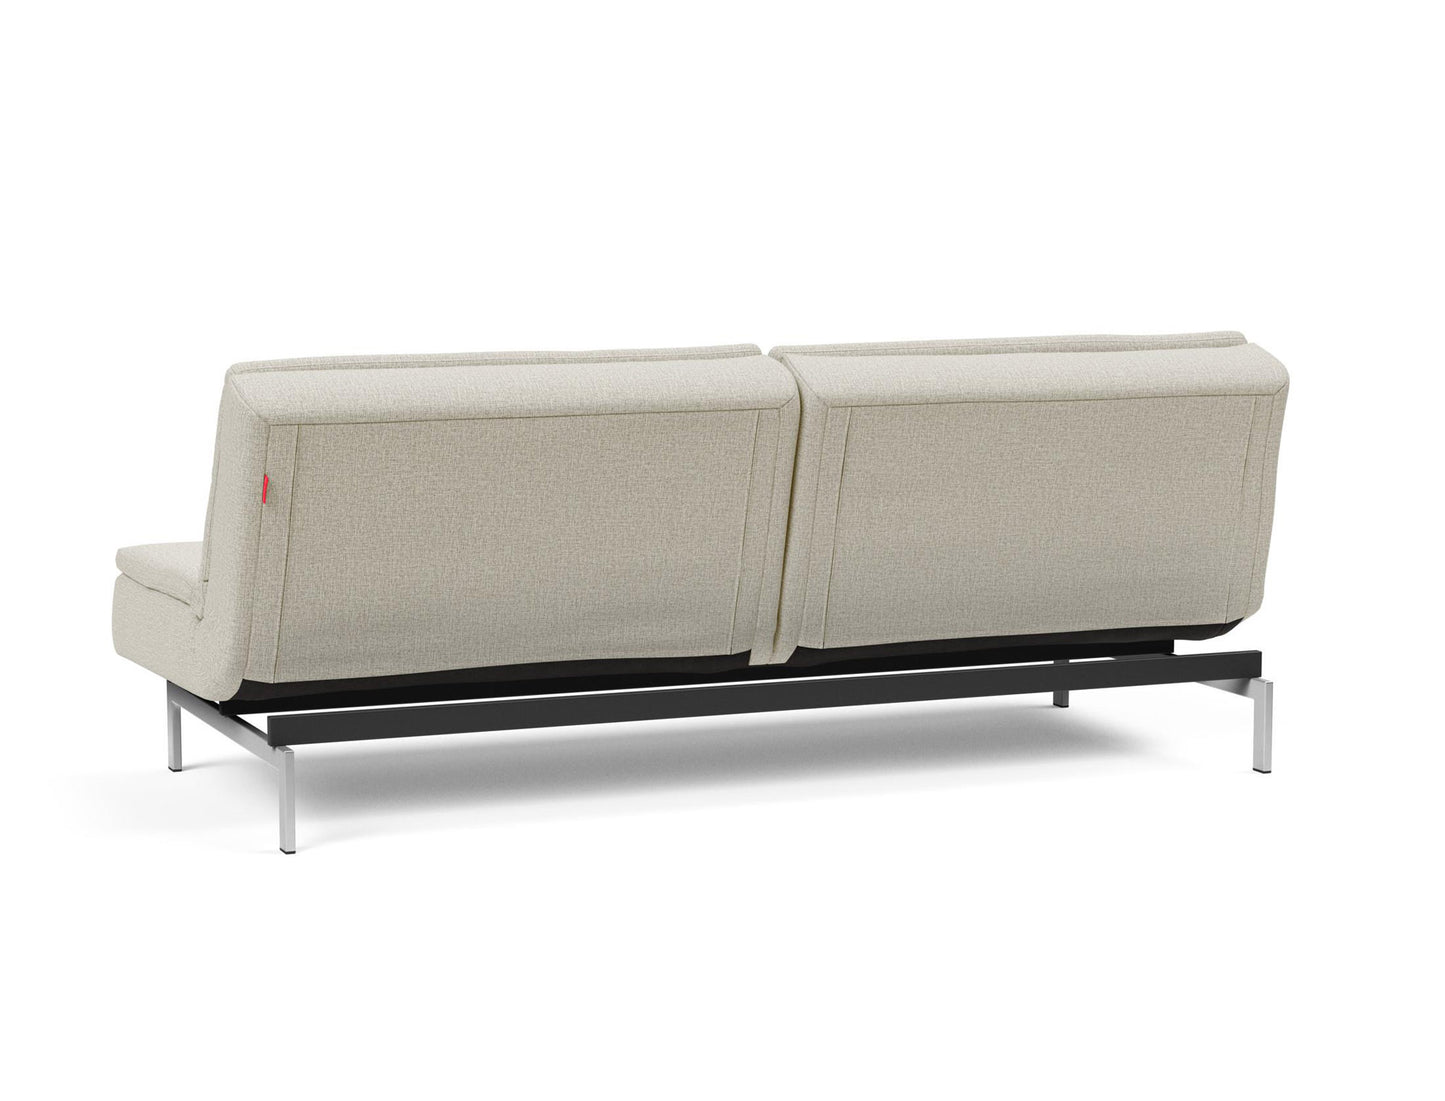 Innovation Living Dublexo Deluxe Sofa Bed with Stainless Steel Legs